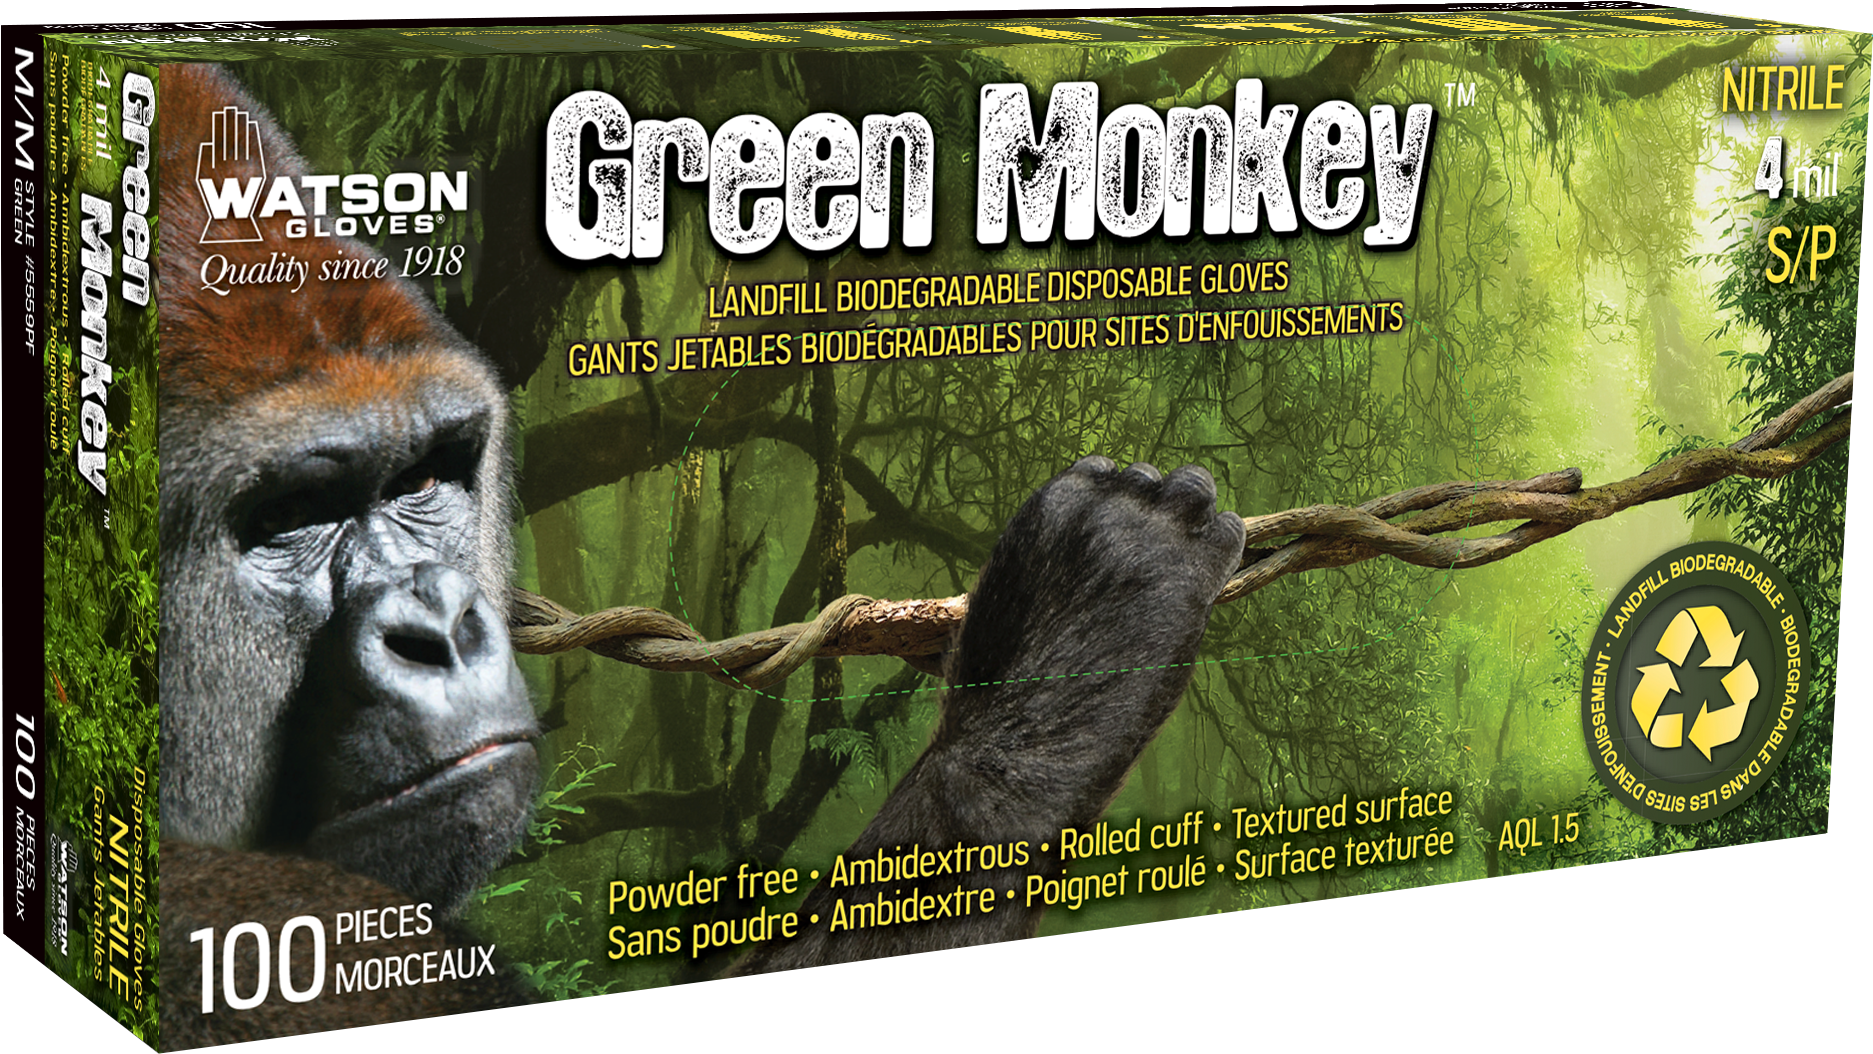 Green Monkey Biodegradable Gloves Packaging PNG